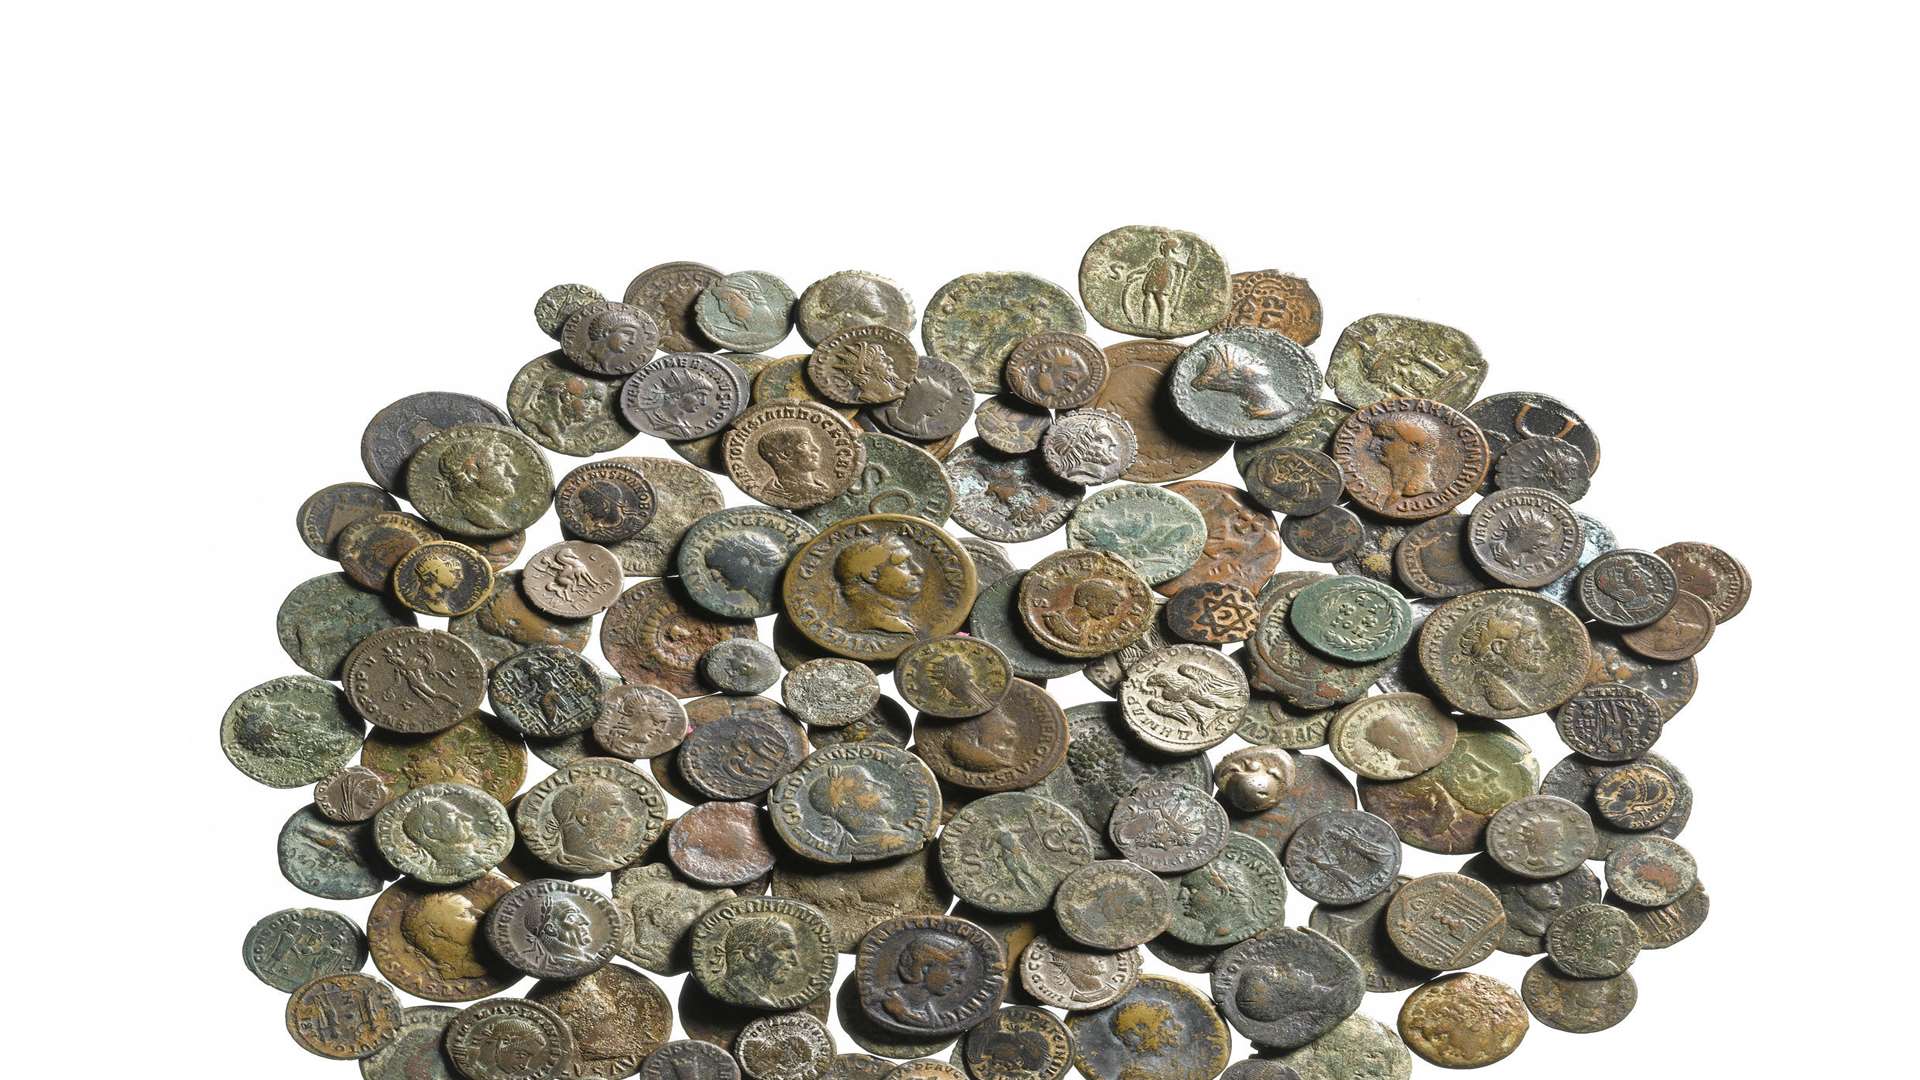 Rare ancient coins found in drawer at Scotney Castle near Lamberhurst